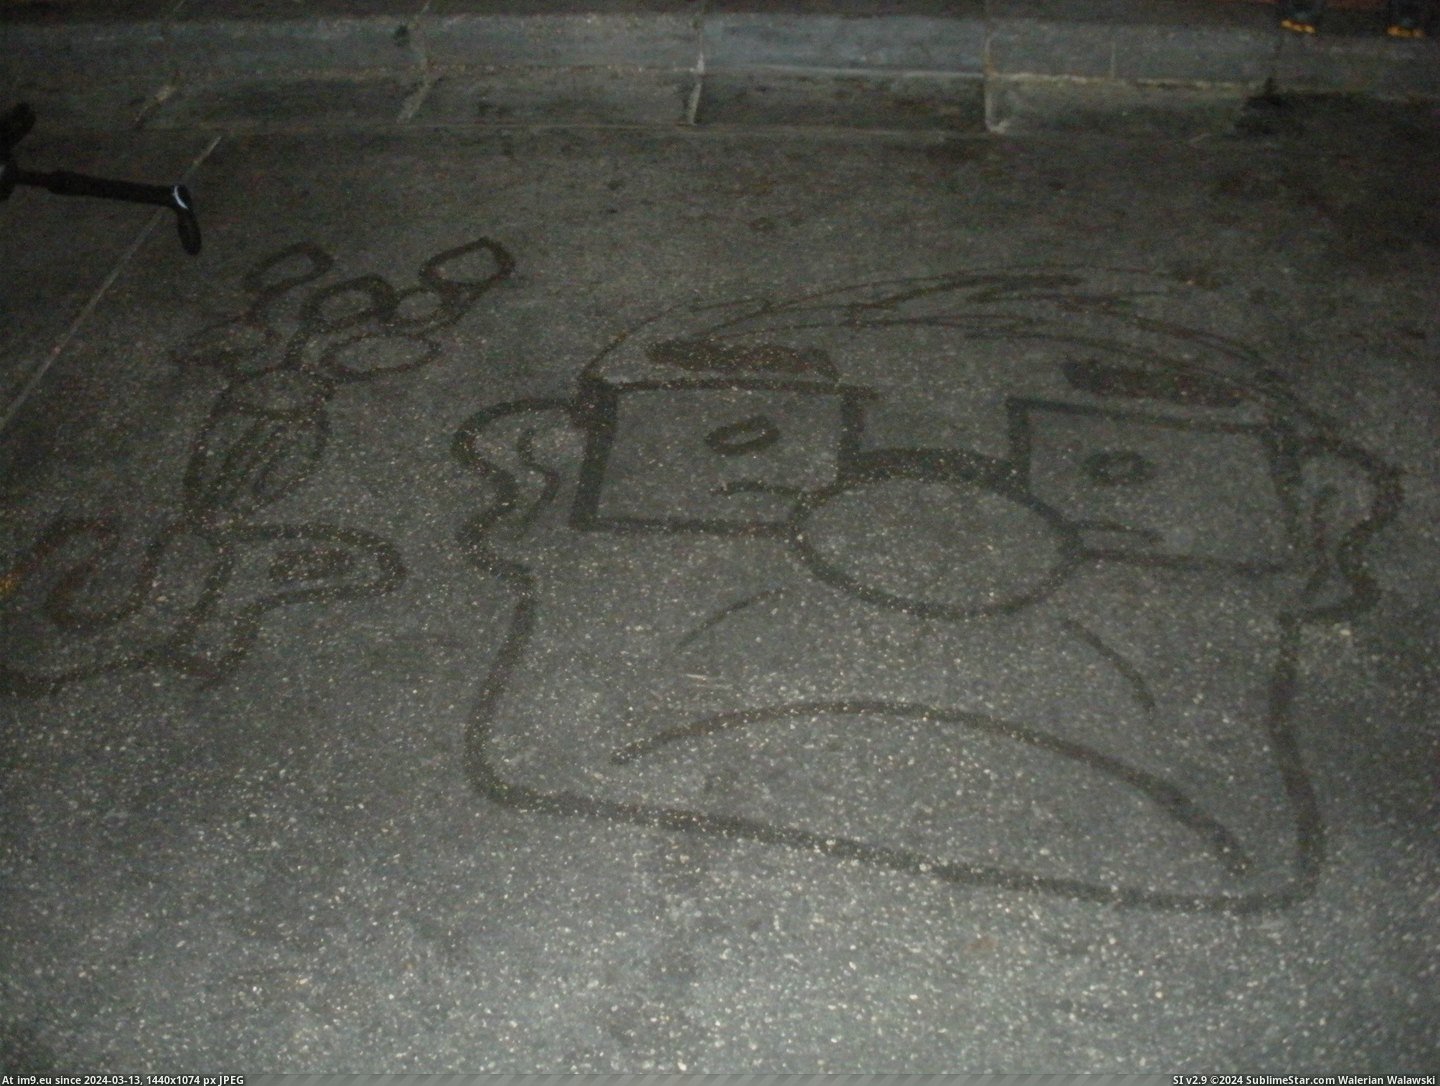 #World #Water #Disney #Guests #Janitor #Broom #Entertain #Characters #Drew #Sidewalk [Pics] As a janitor at Disney World, I drew characters with water and a broom on the sidewalk to entertain guests. 1 Pic. (Bild von album My r/PICS favs))